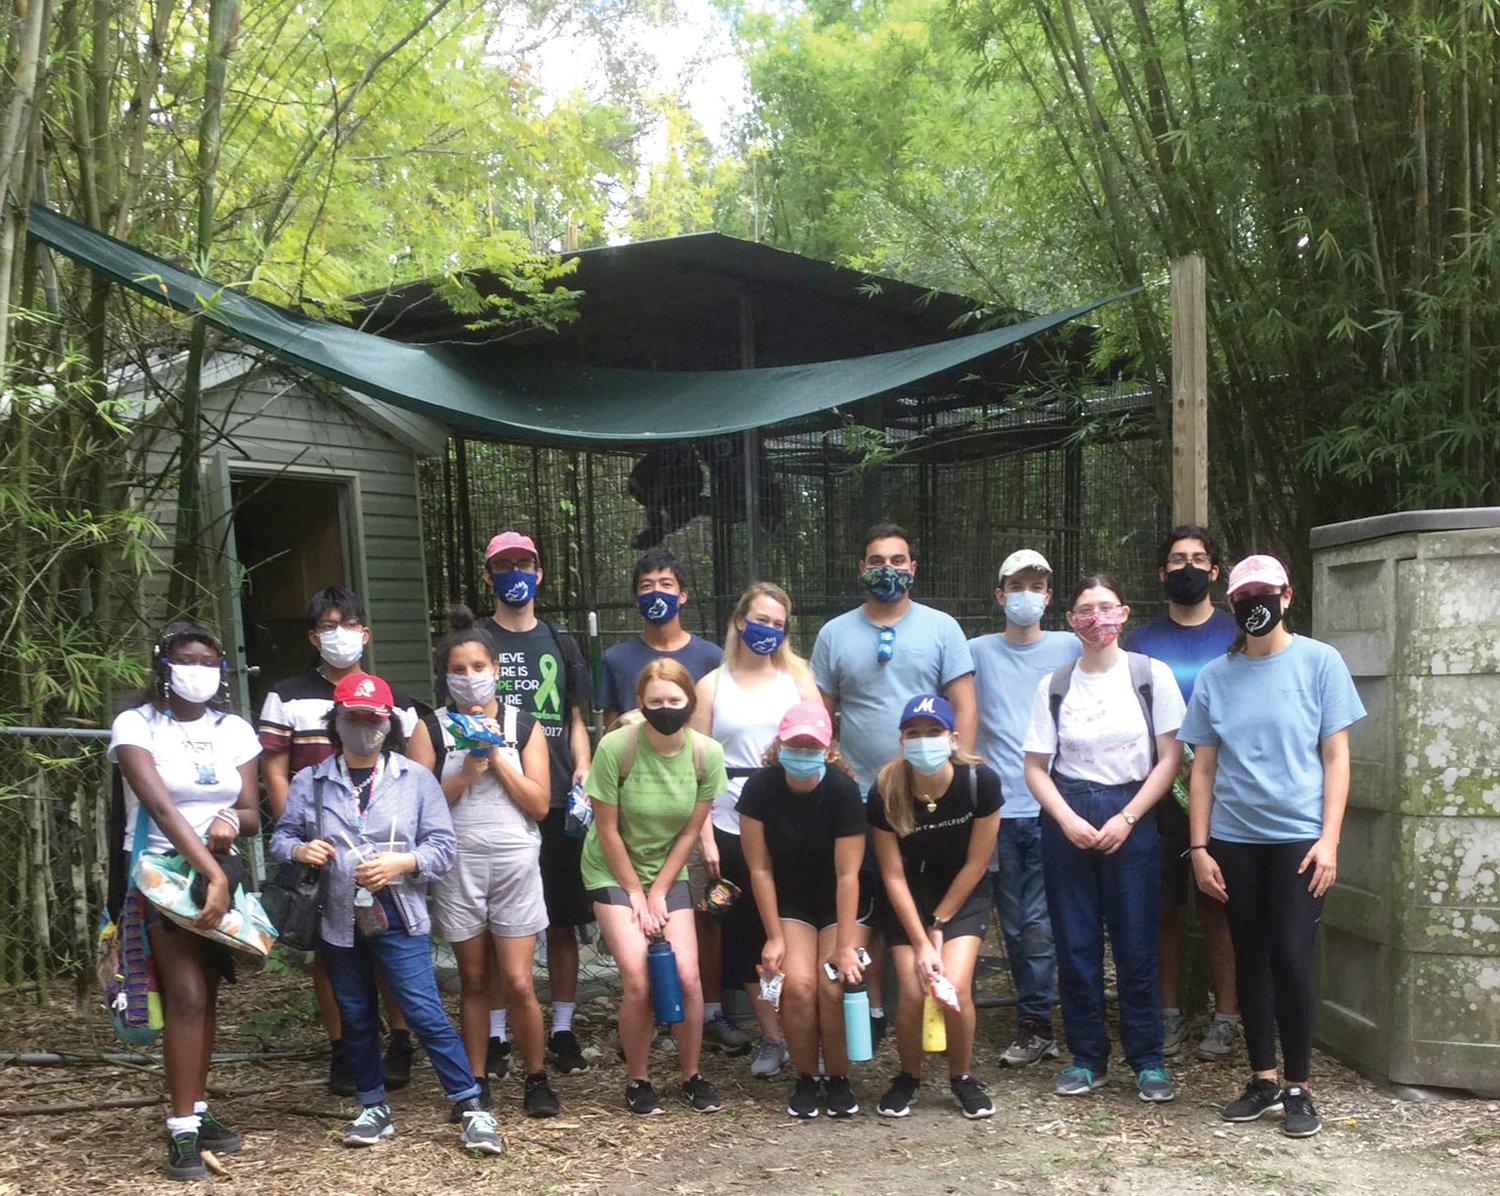 HENDRY COUNTY —  The students, all members of the FGCU Wildlife Club, got together for a group shot after a long, hard day of working to keep the primates housed there eating and dwelling comfortably. They wore masks and observed social distancing rules during their toils in the jungle.